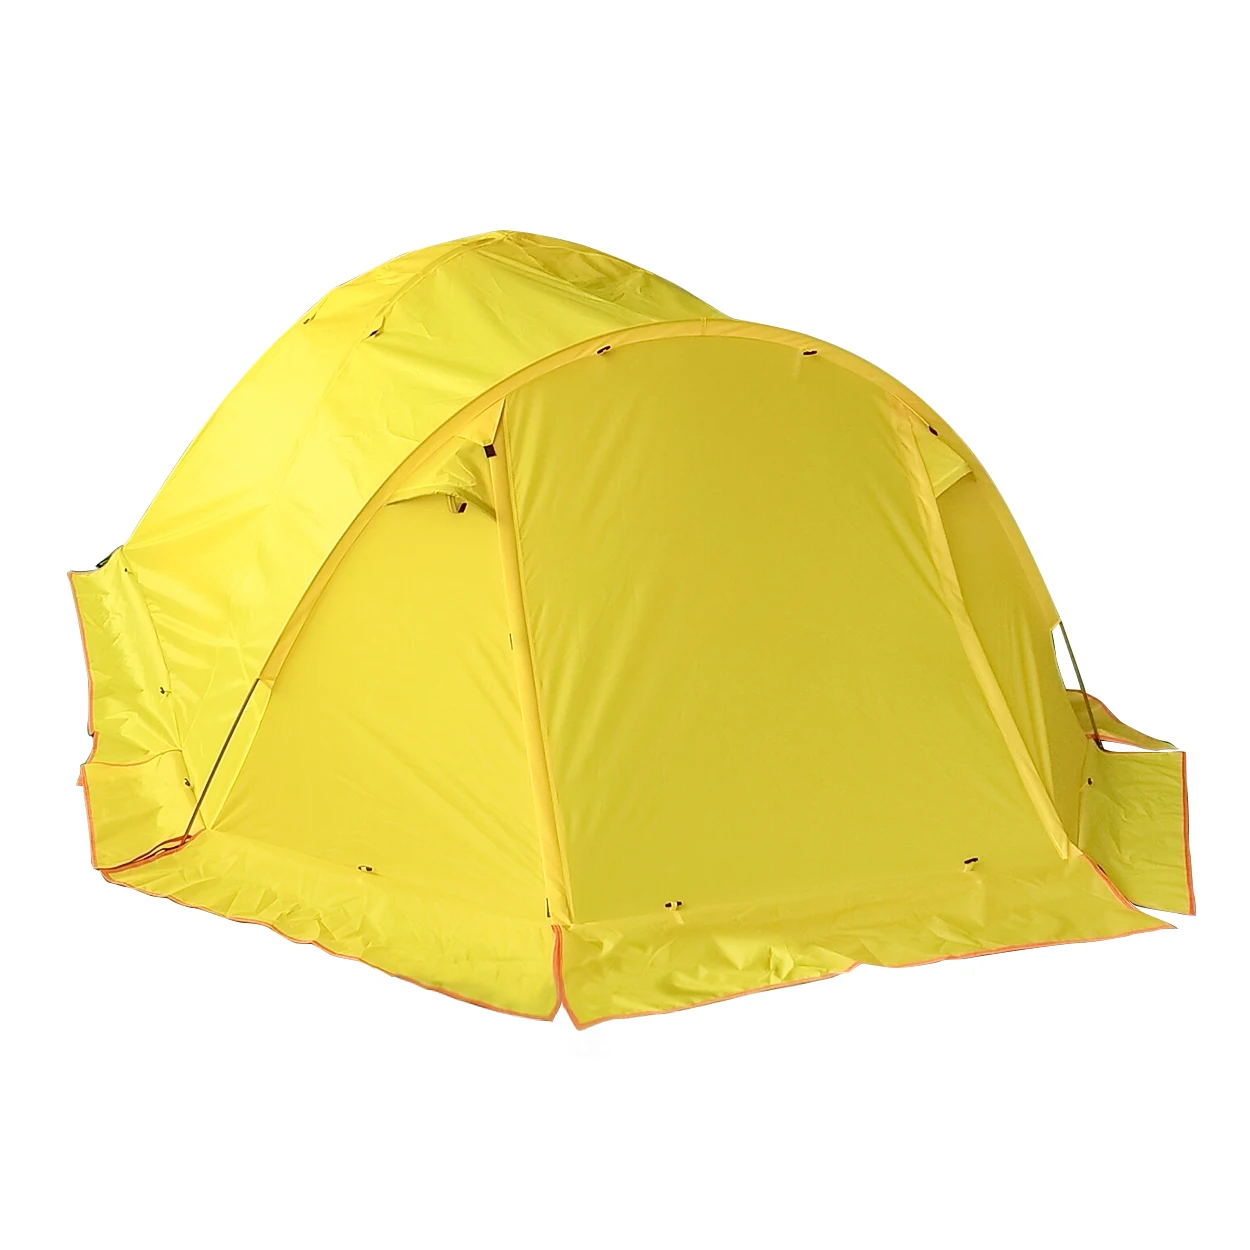 Pandaman-Tear Resistant Camping Tent, Windproof Light, 210T, Plaid Polyester, PU3000mm, 4-6 Person with Snow Skirt